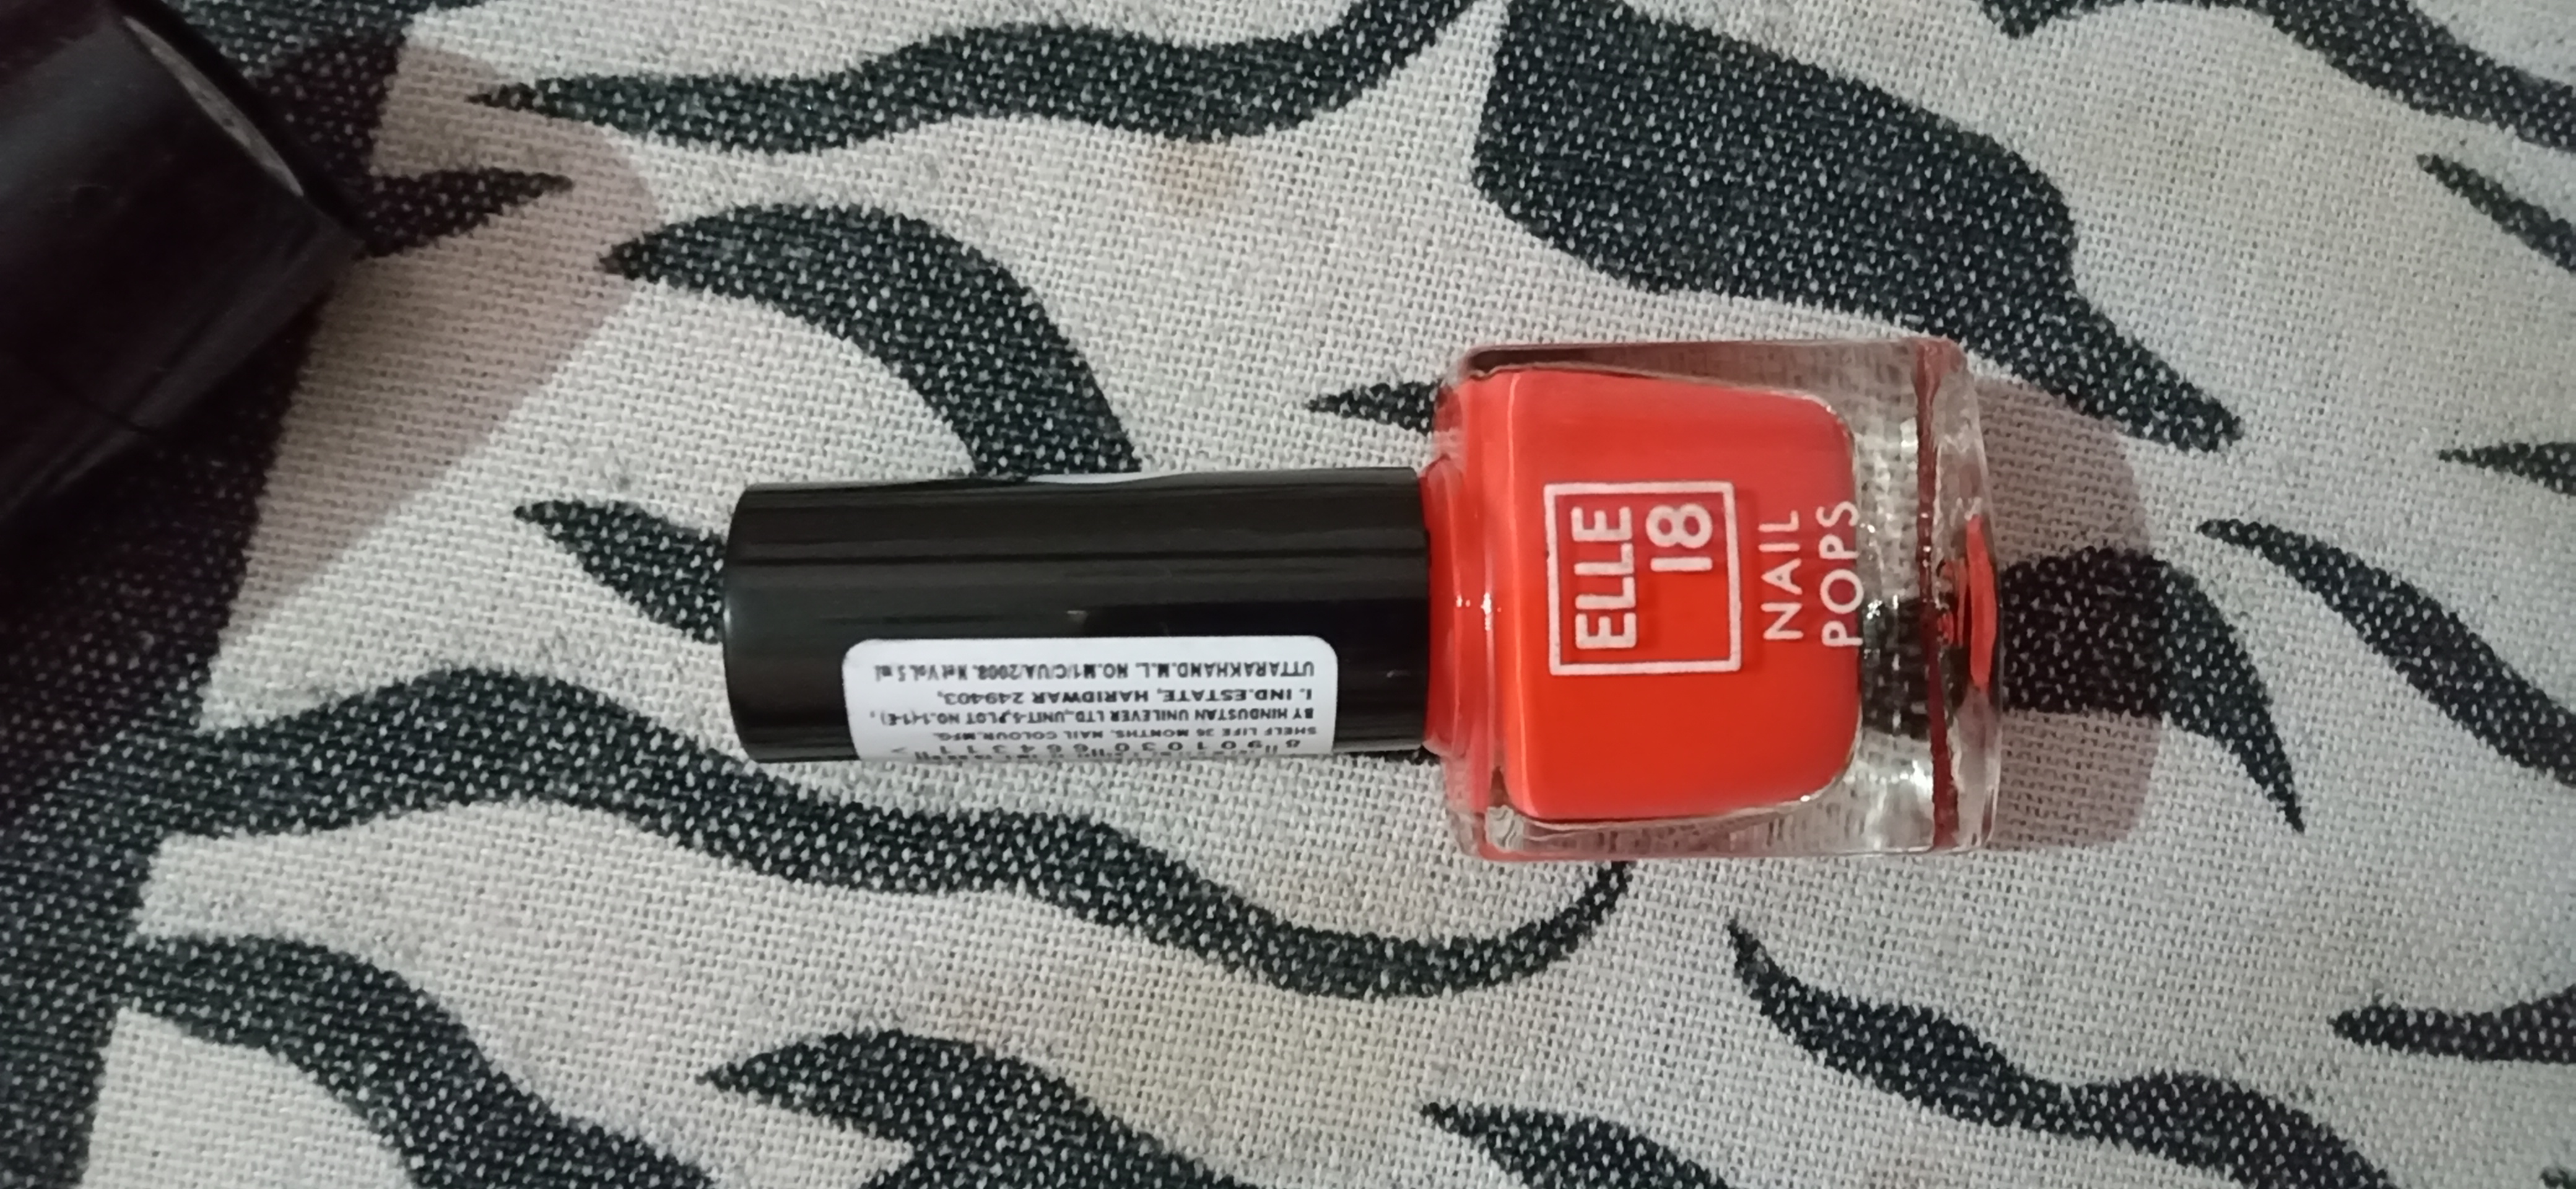 Elle 18 Nail Pops Nail Polish Reviews, Price, Benefits: How To Use It?